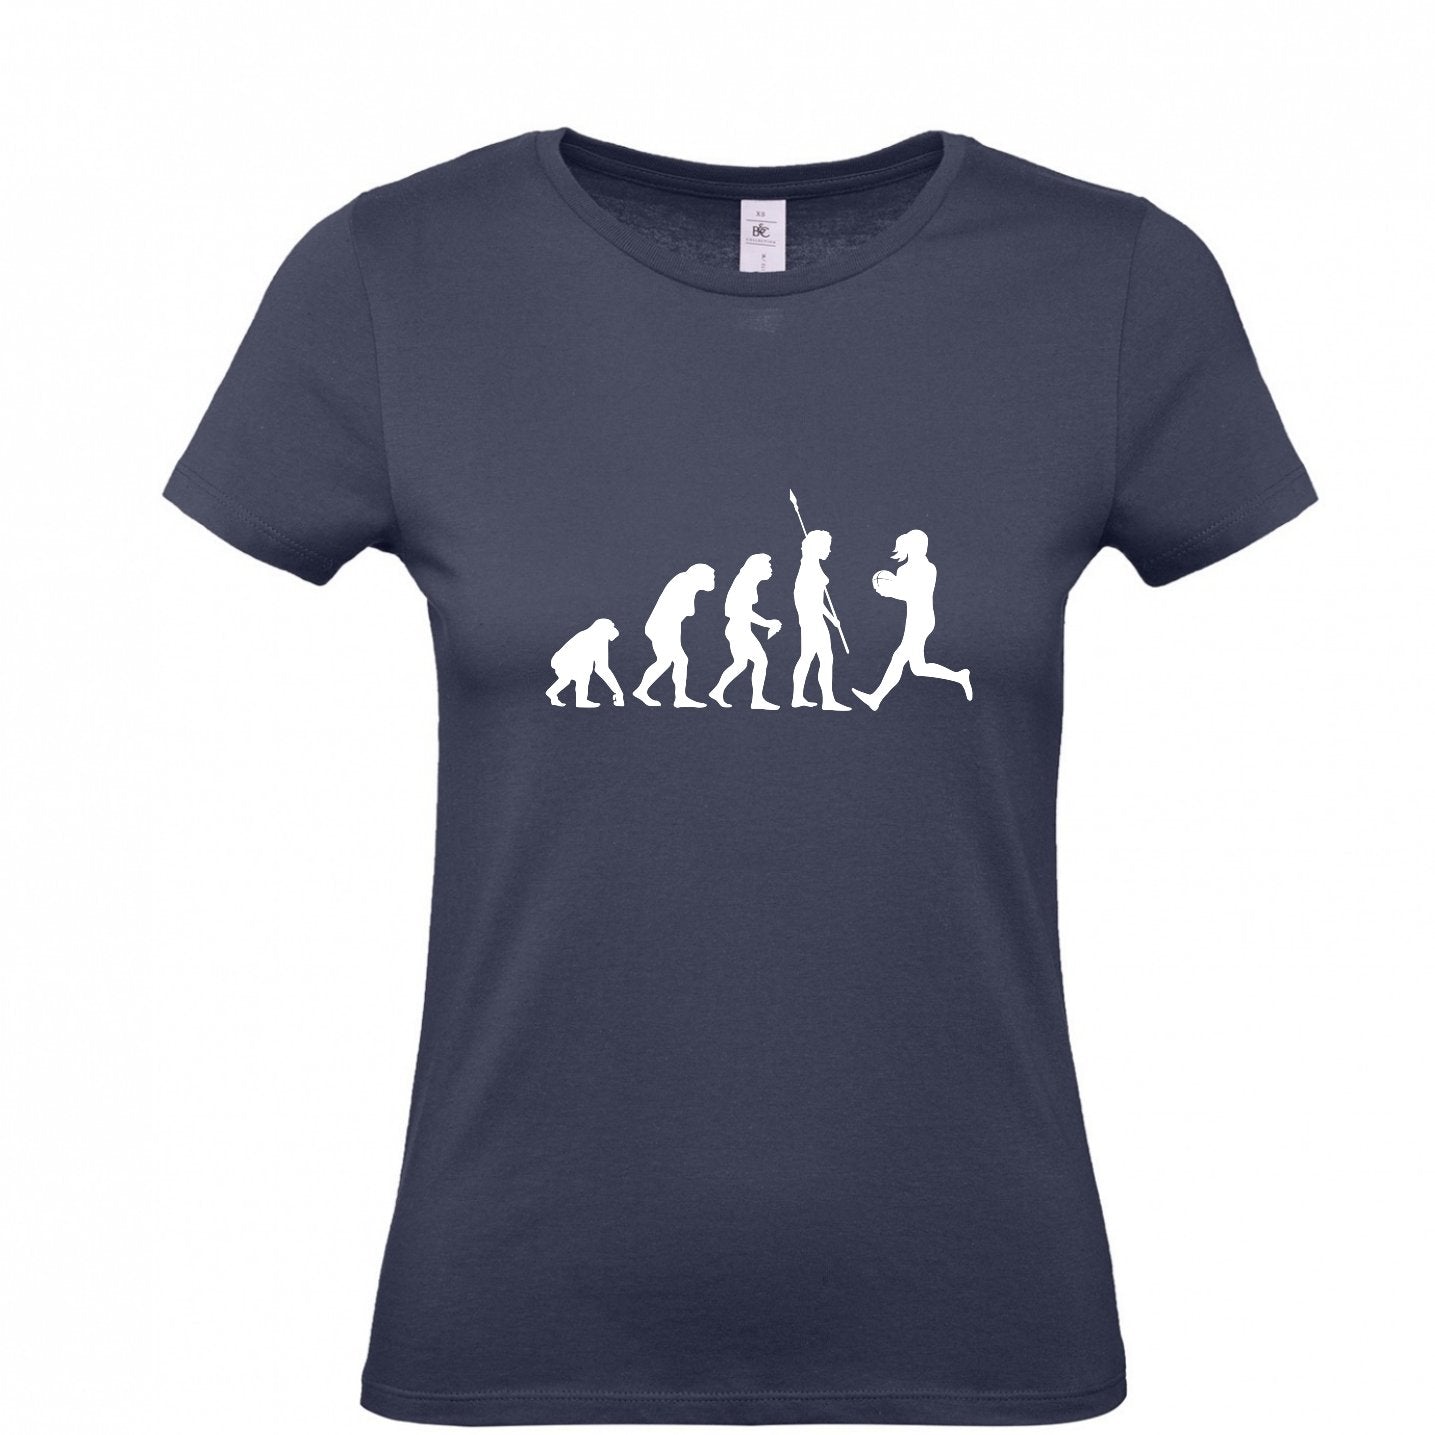 Evolution of Rugby T-Shirt for Teens/Adults - Scarf Monkey